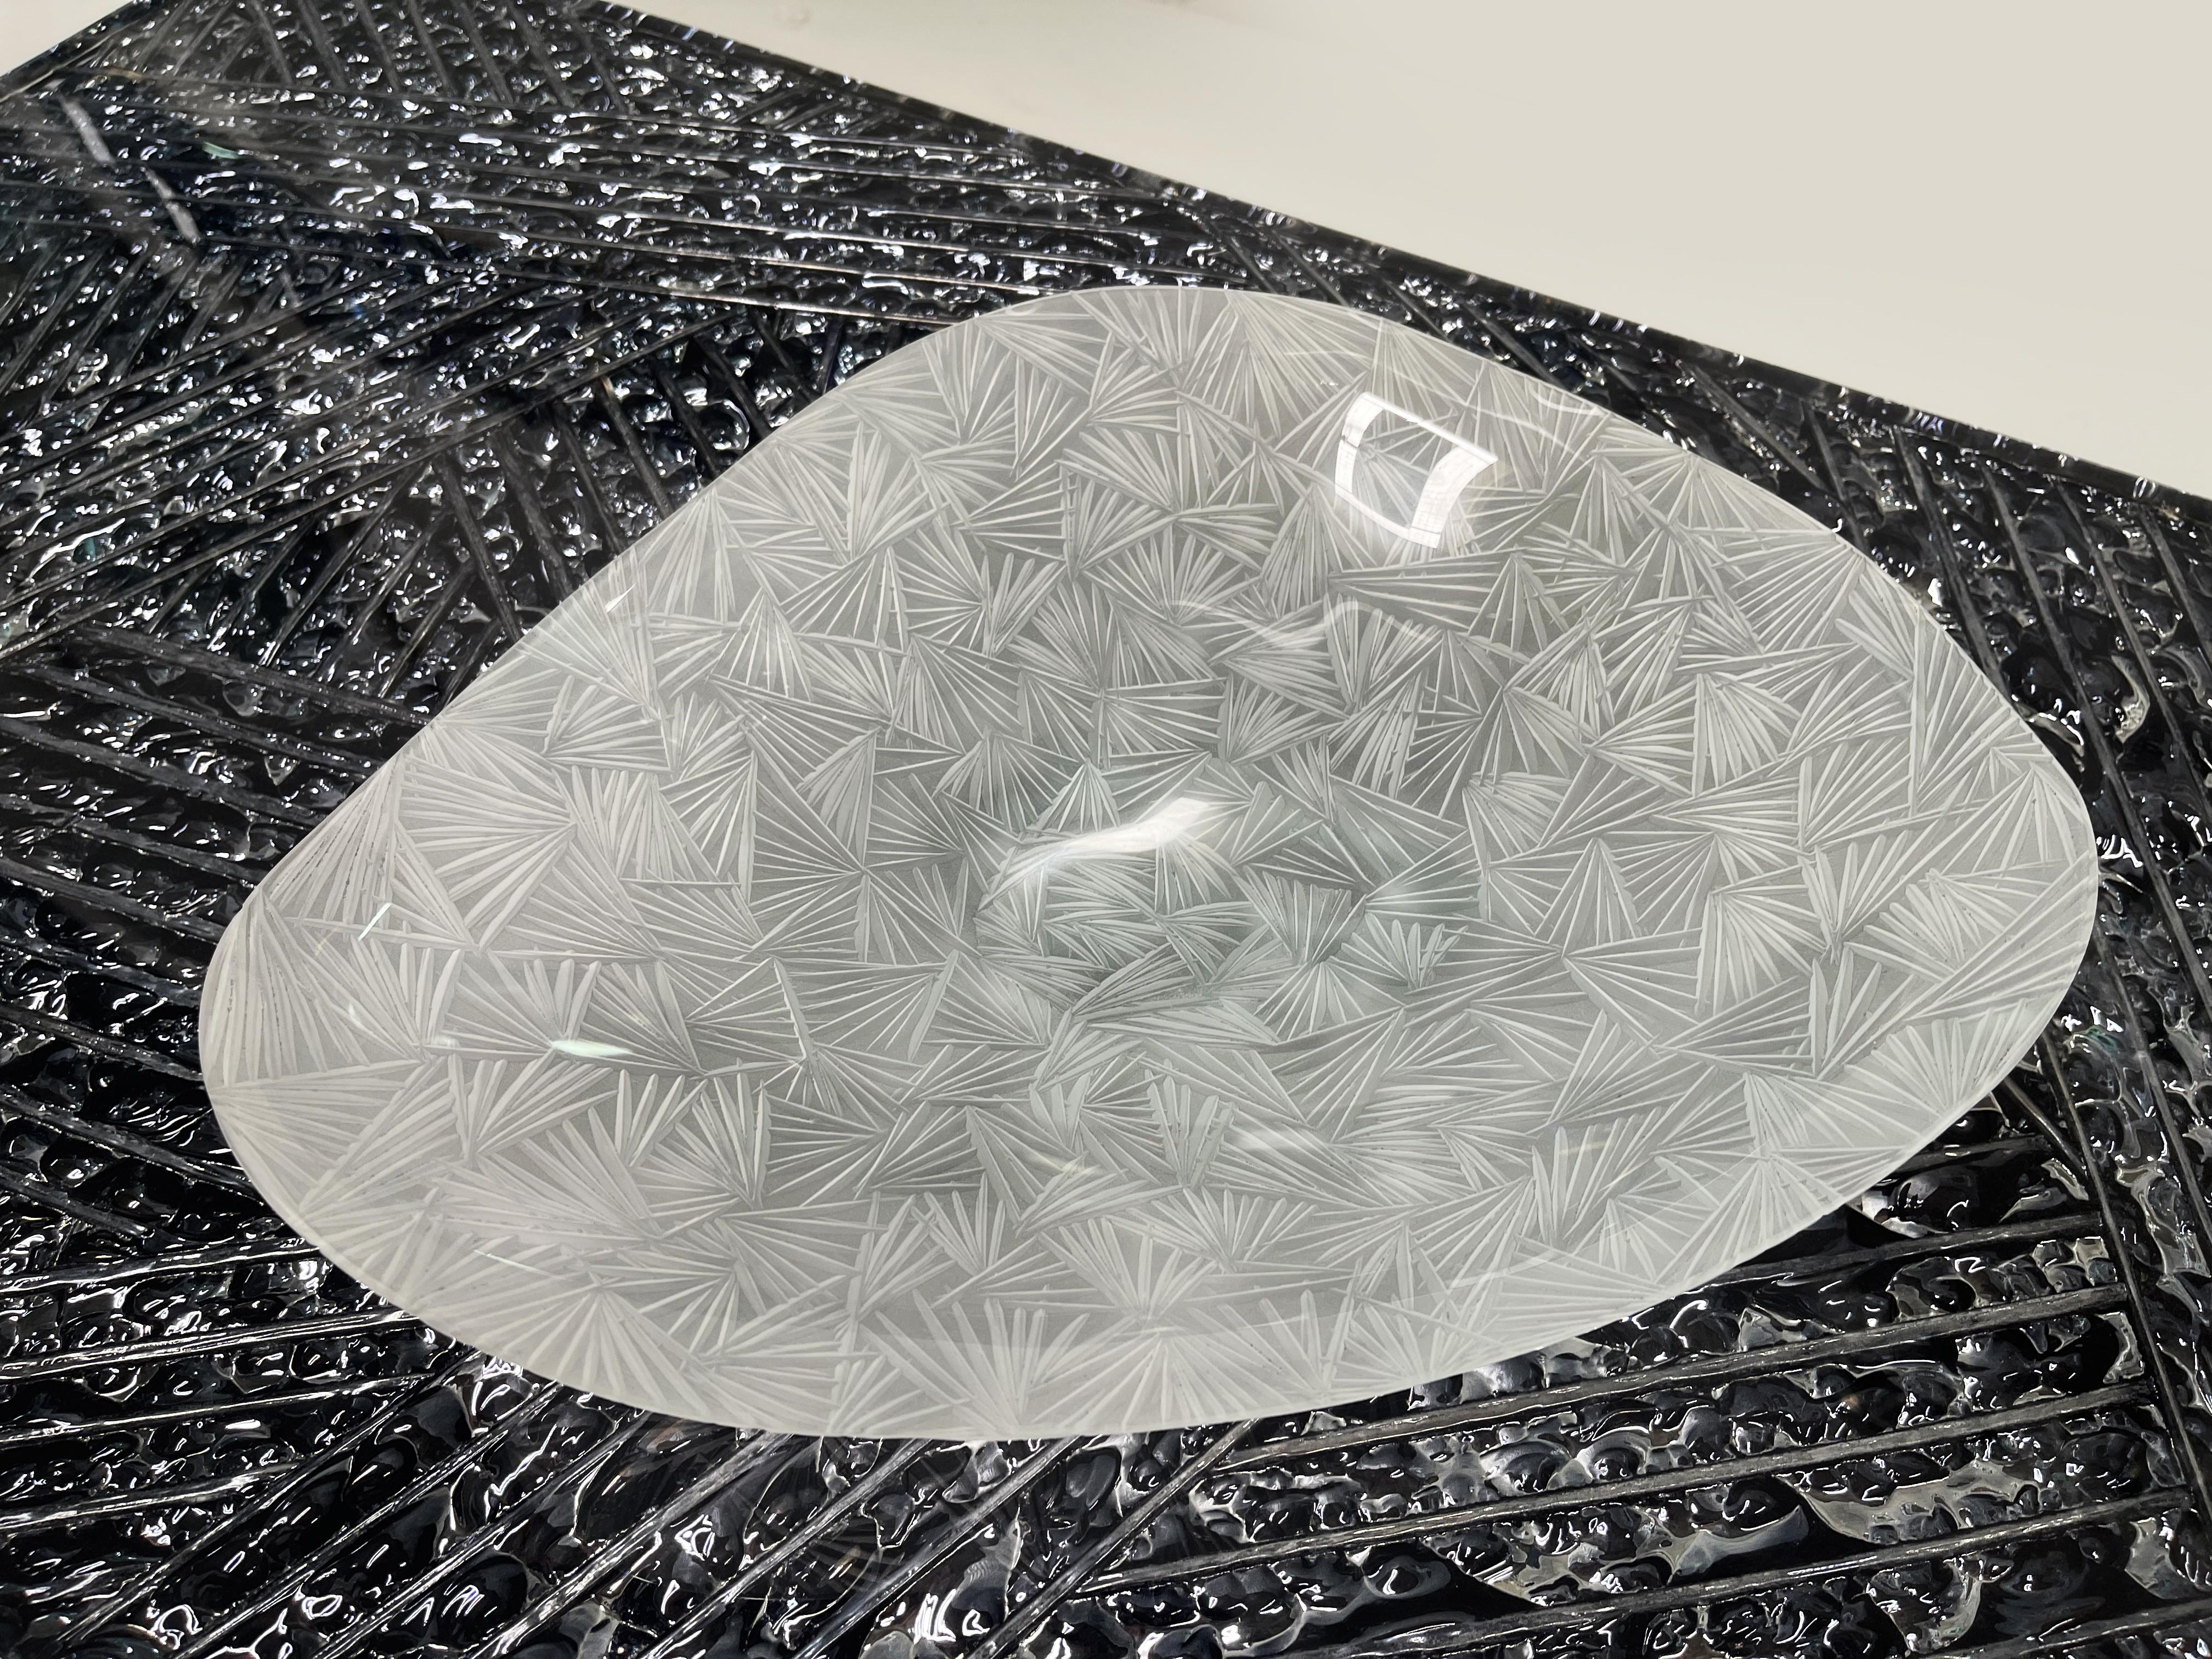 Italian Contemporary 'Ice' Crystal Bowl Satin Hand Engraved Unique Piece by Ghirò Studio For Sale